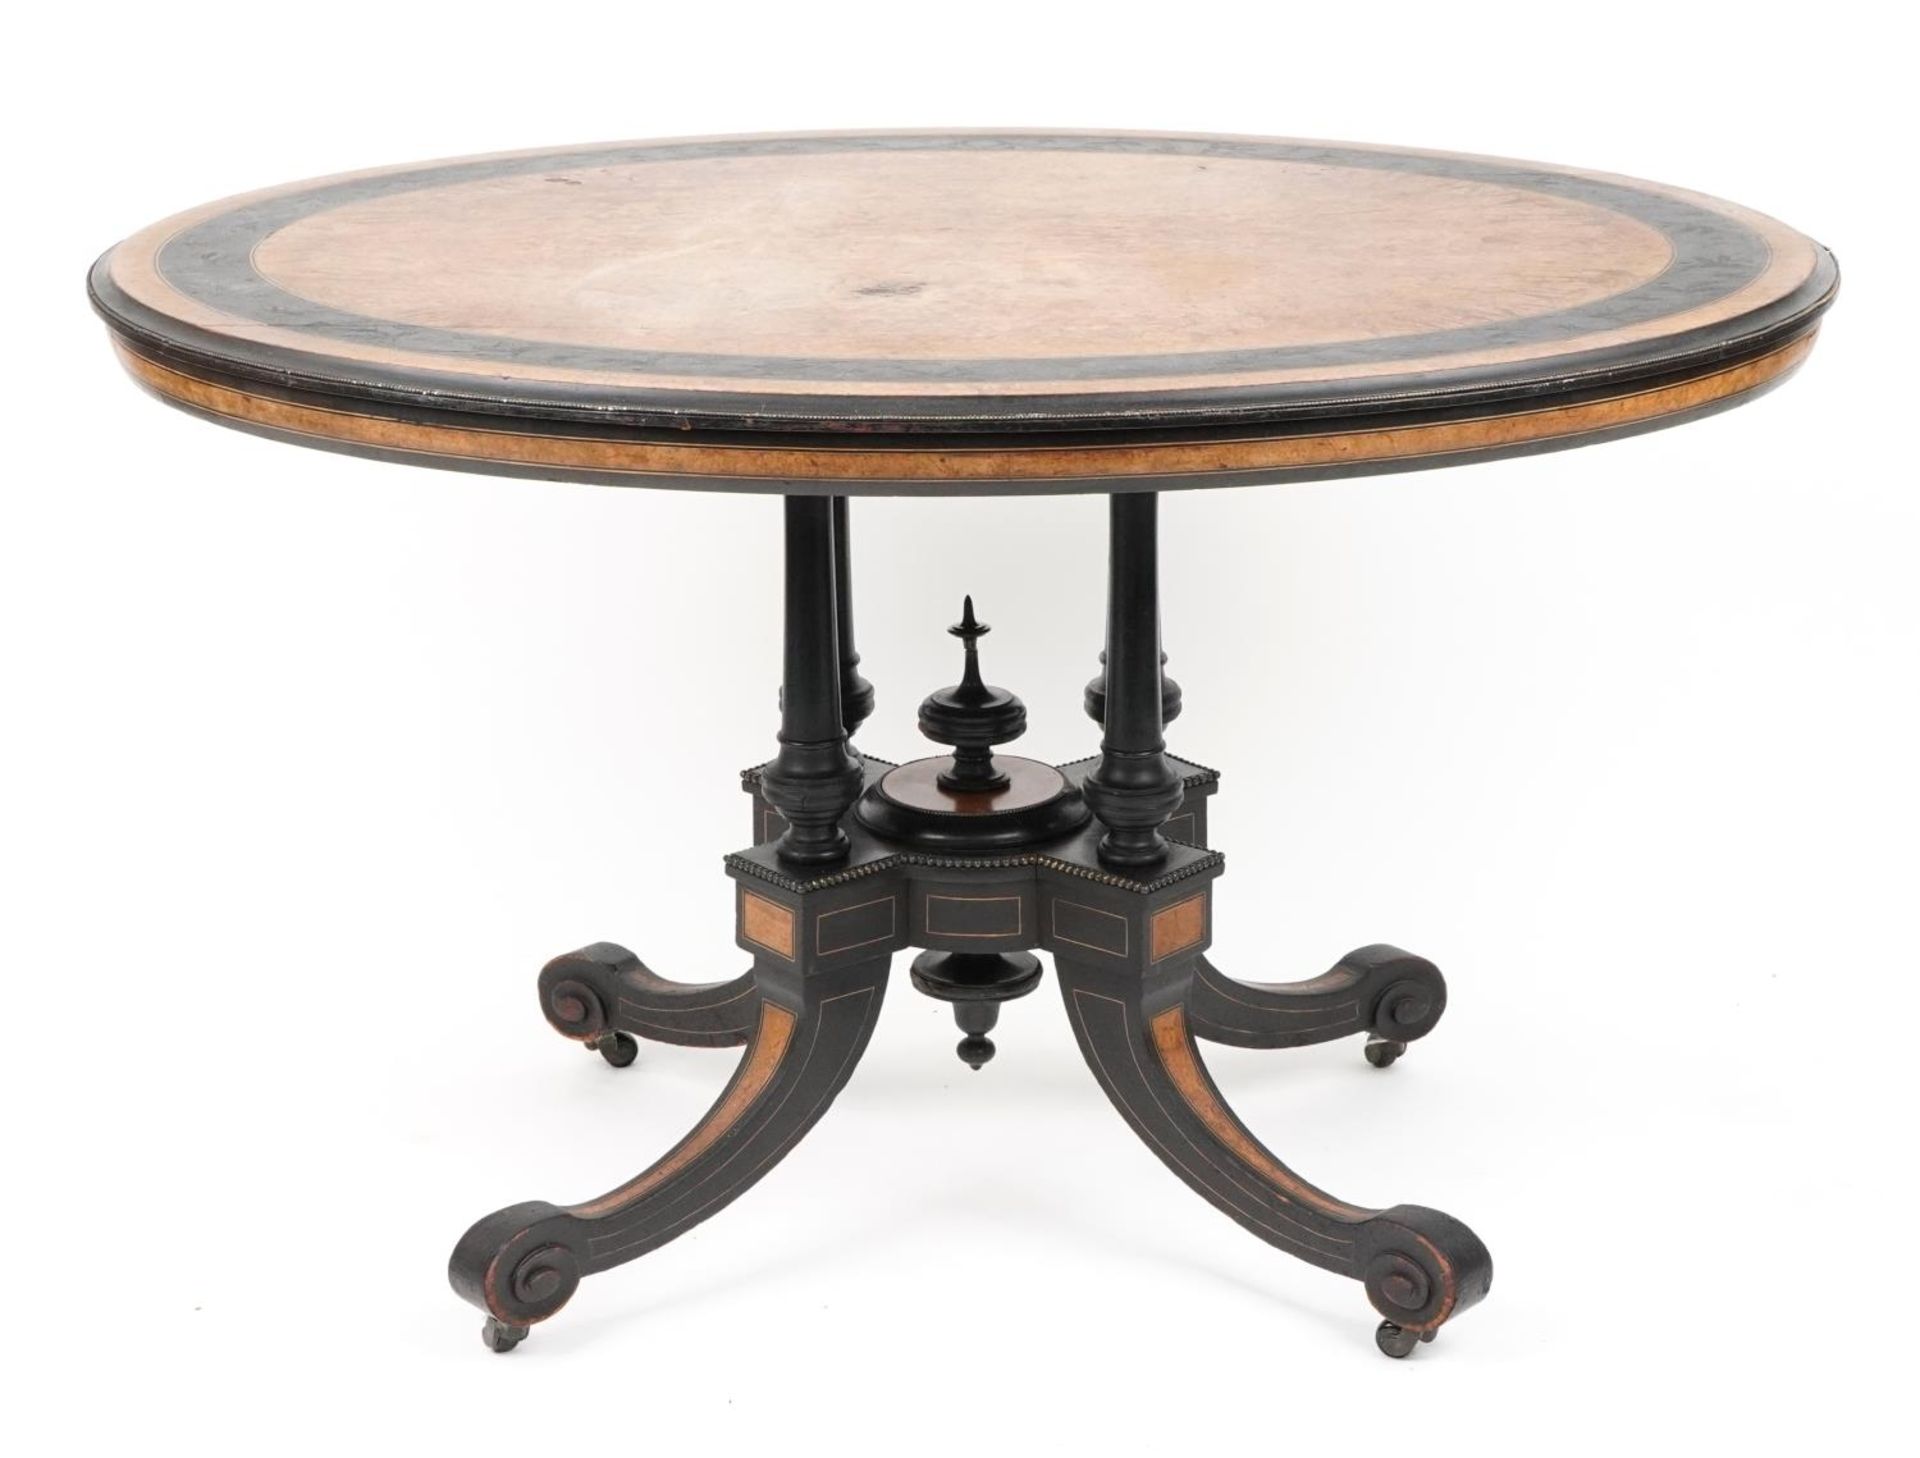 Victorian aesthetic burr walnut and ebonised tilt top table carved with flowers amongst scrolling